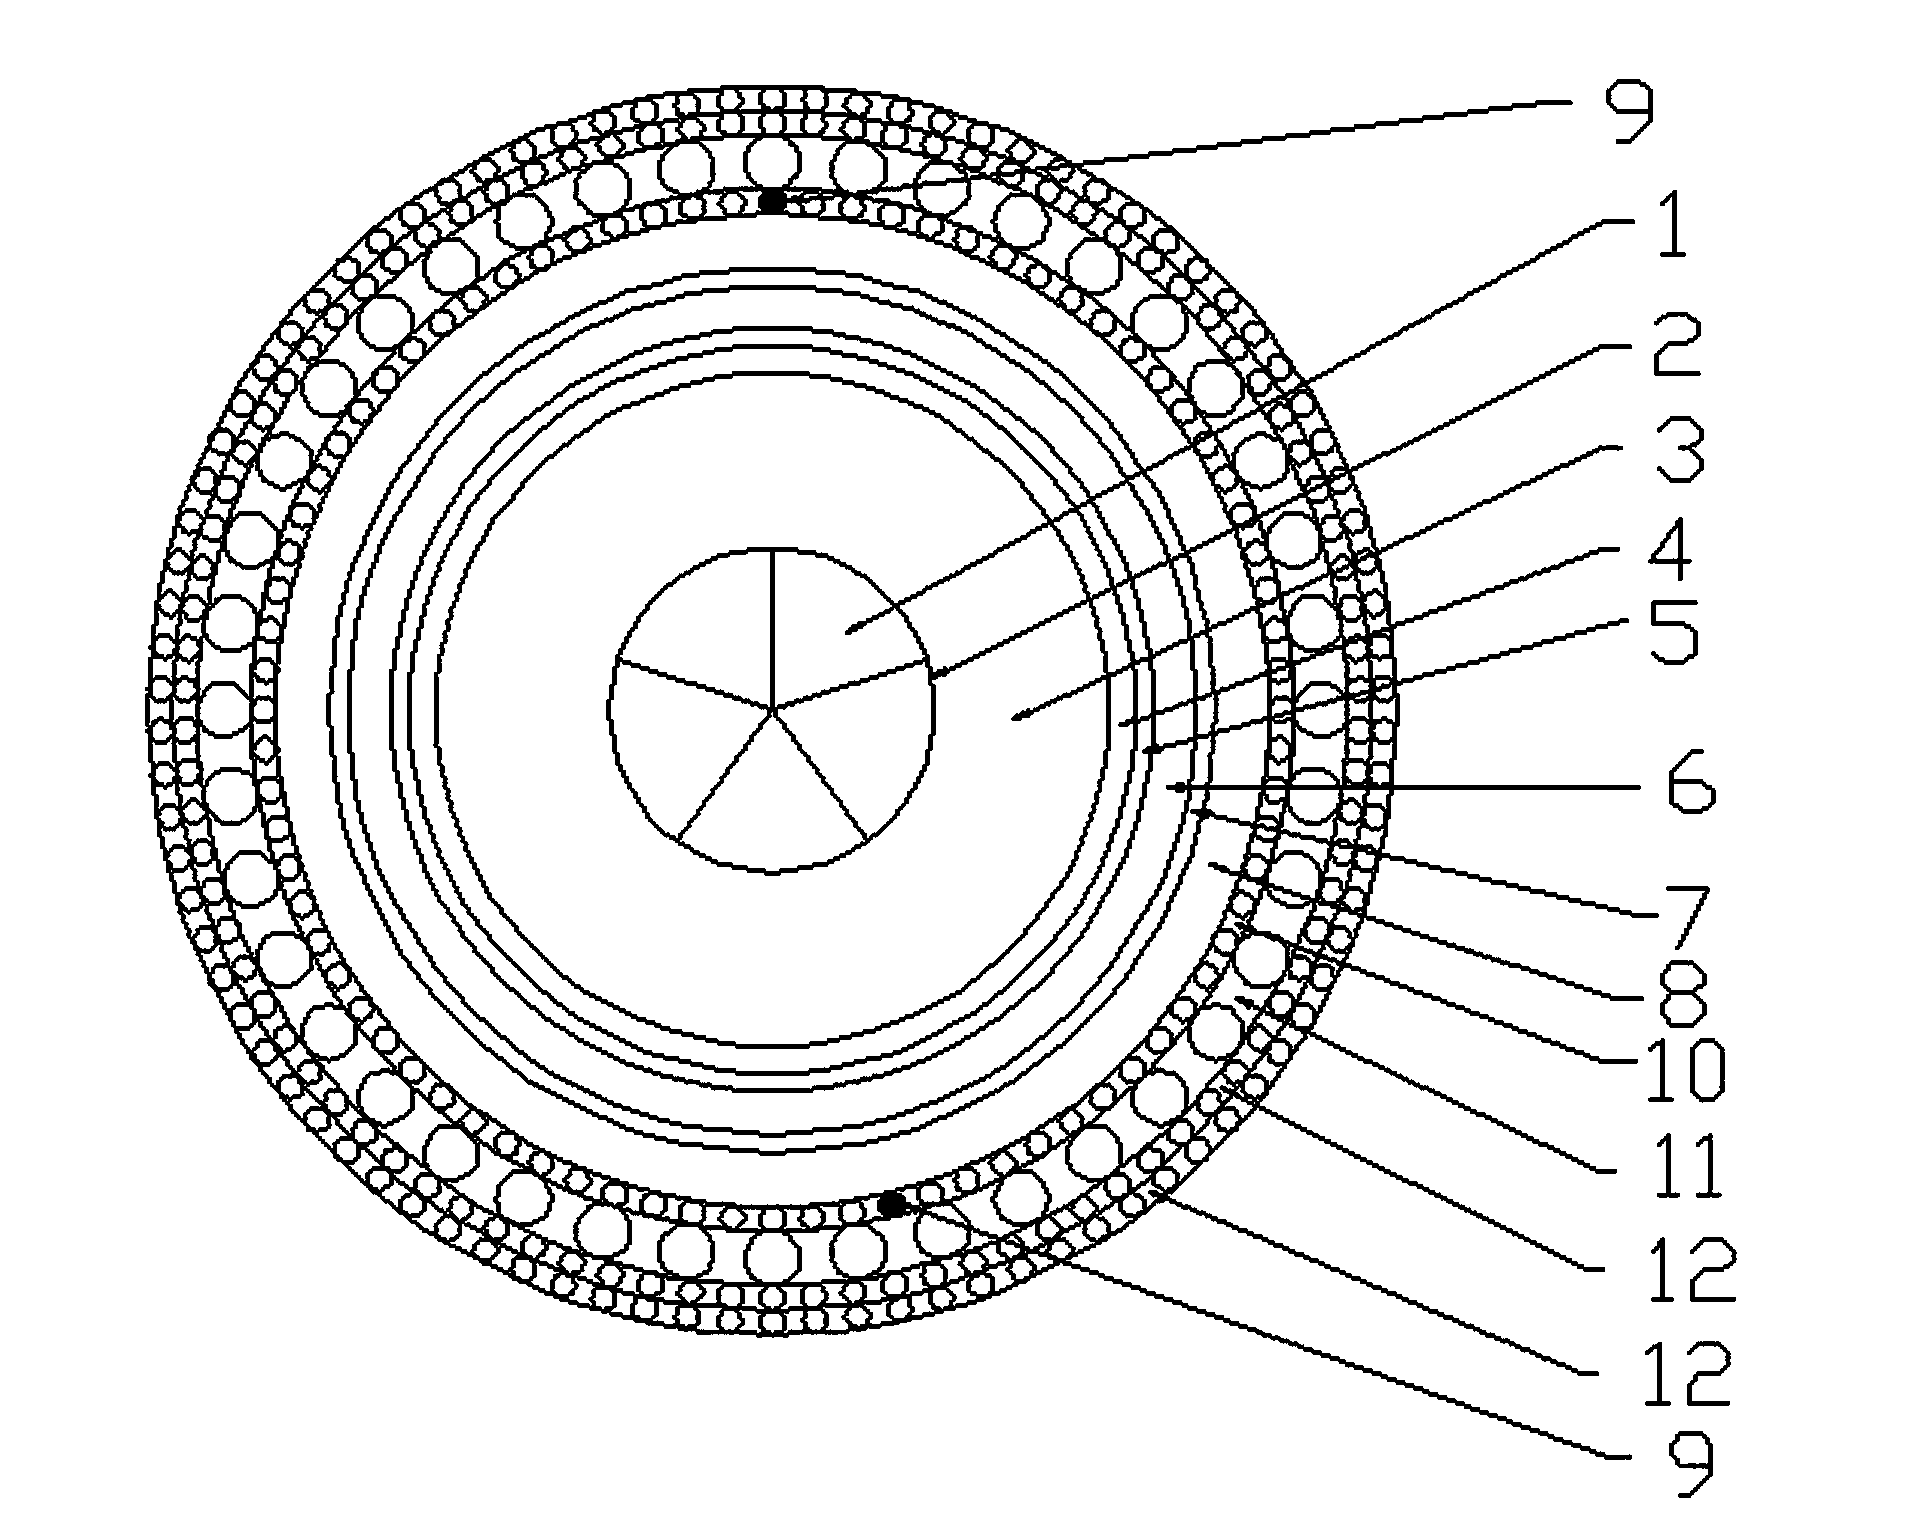 Manufacturing method for seabed photoelectricity composite rope with split conductor in huge cross section